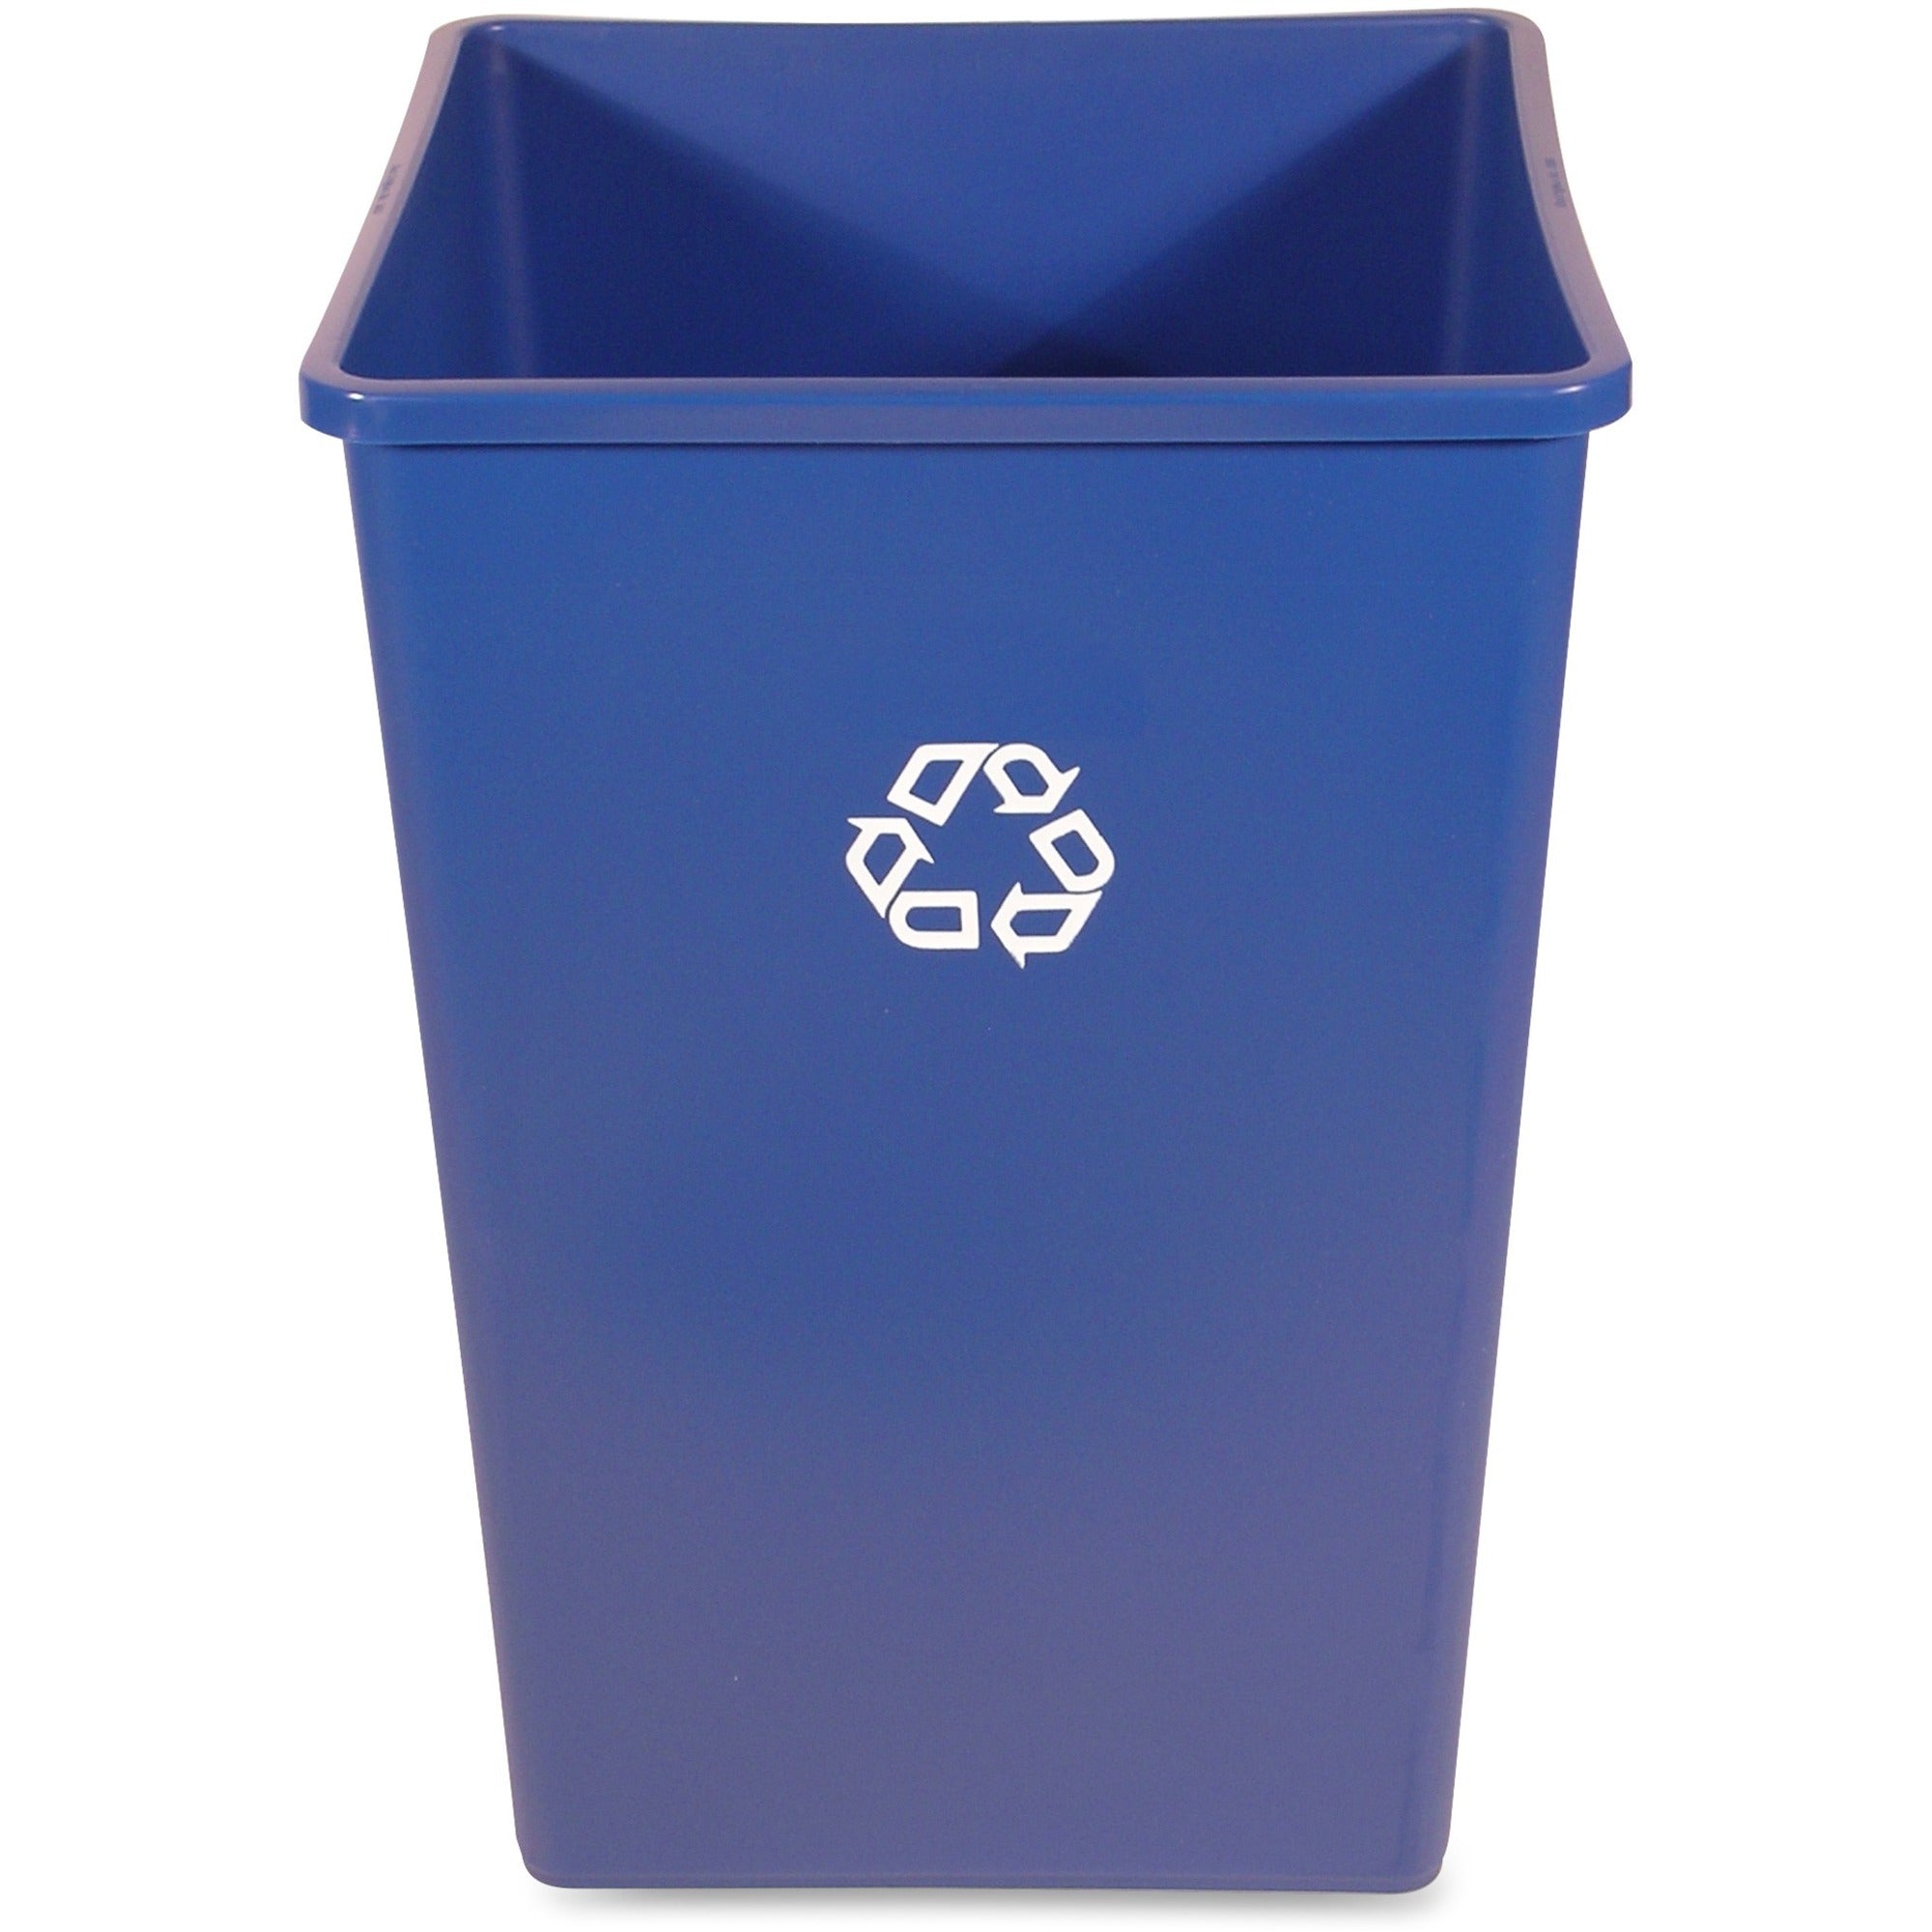 rubbermaid-commercial-untouchable-square-recycling-container-35-gal-capacity-square-easy-to-clean-weather-resistant-compact-276-height-x-195-width-plastic-resin-blue-4-carton_rcp395873bluct - 1